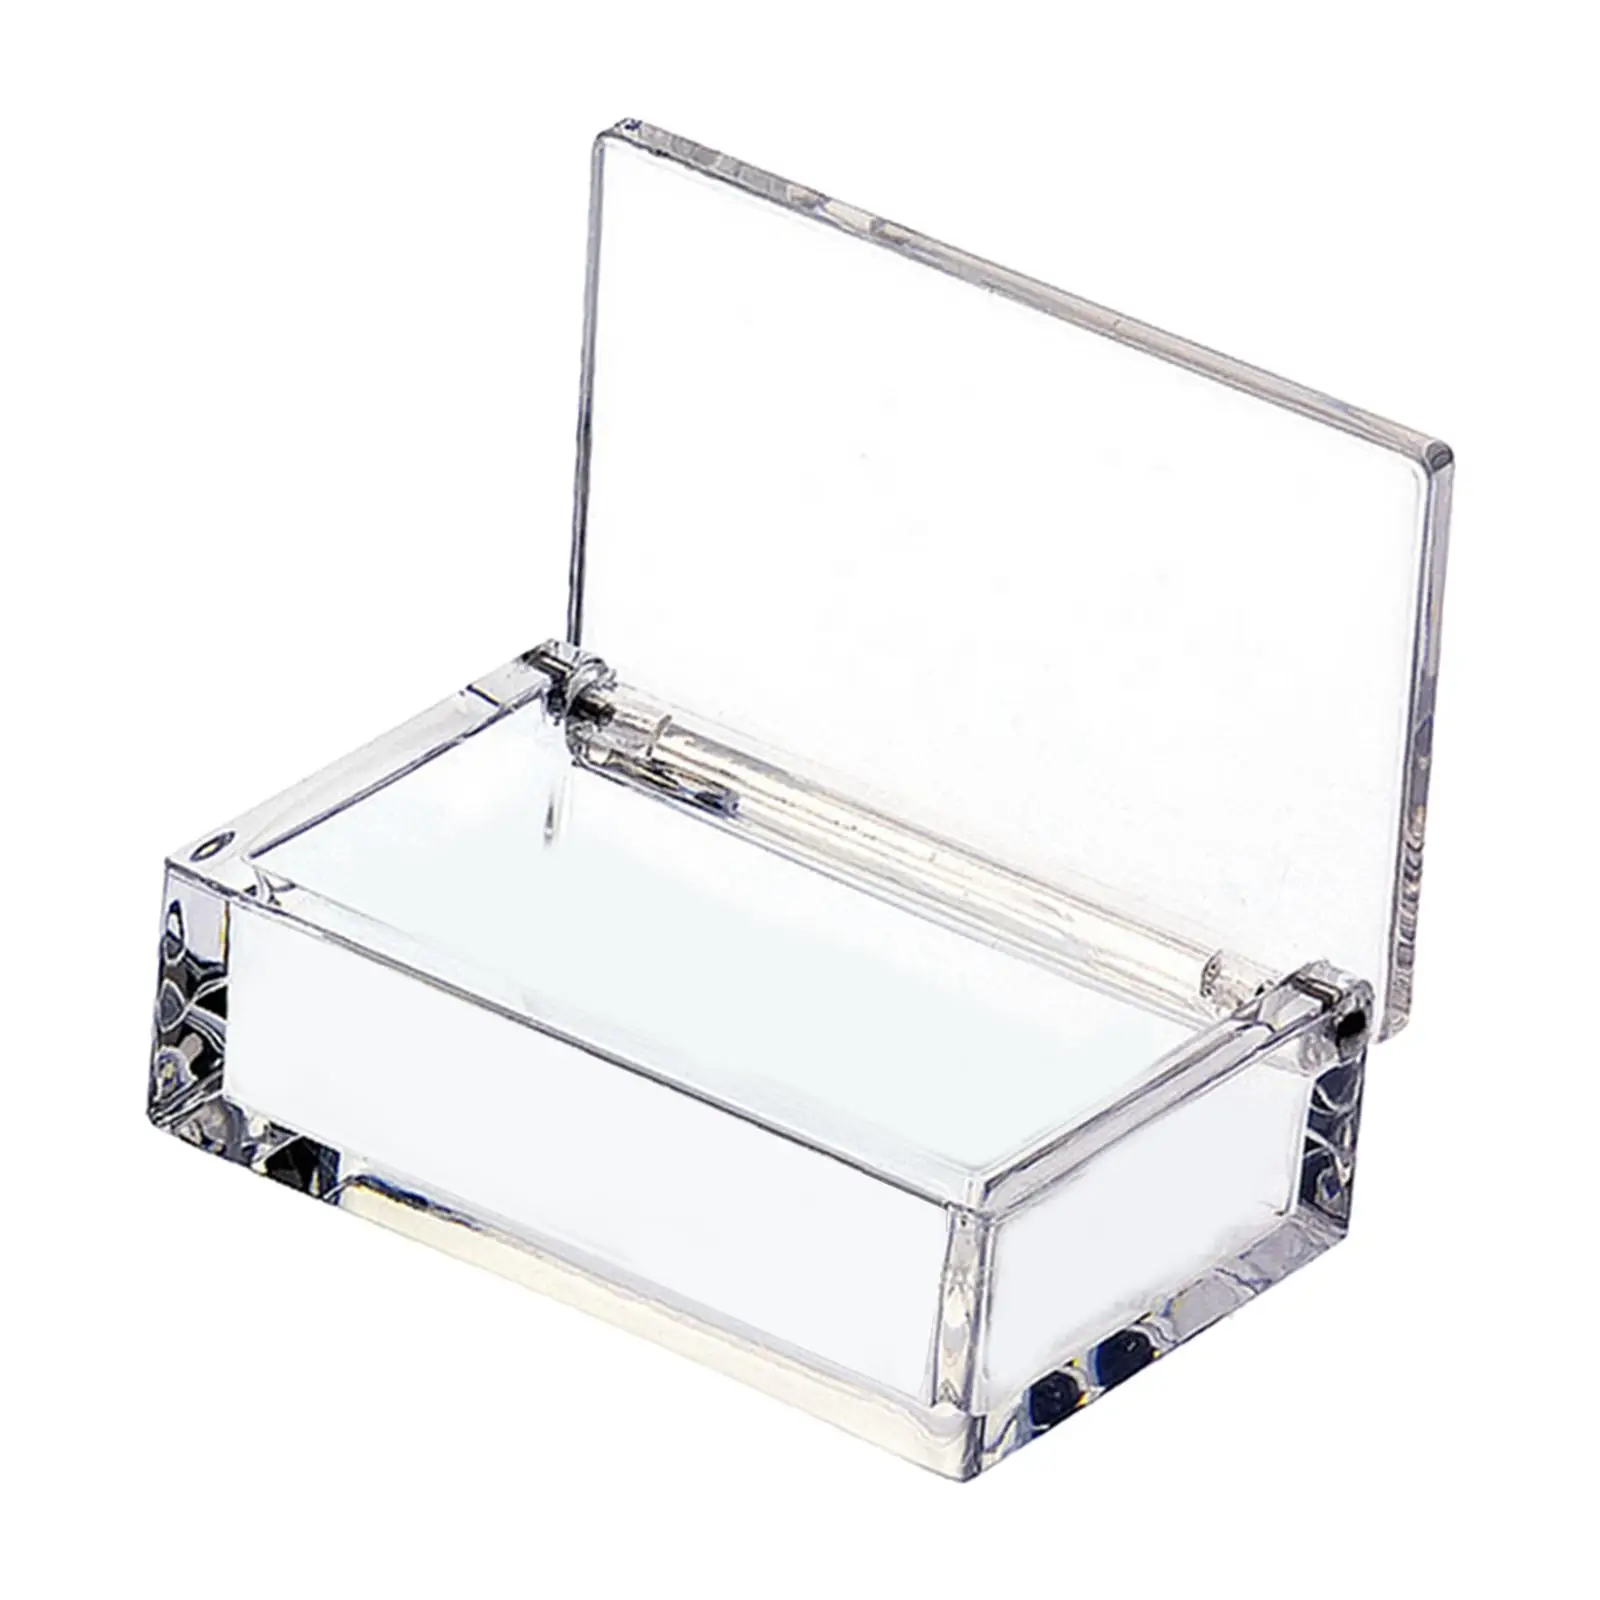 Acrylic Household Items Packing Box Waterproof Protective Cover Transparent Cigarette Case Box for Smoker Gifts